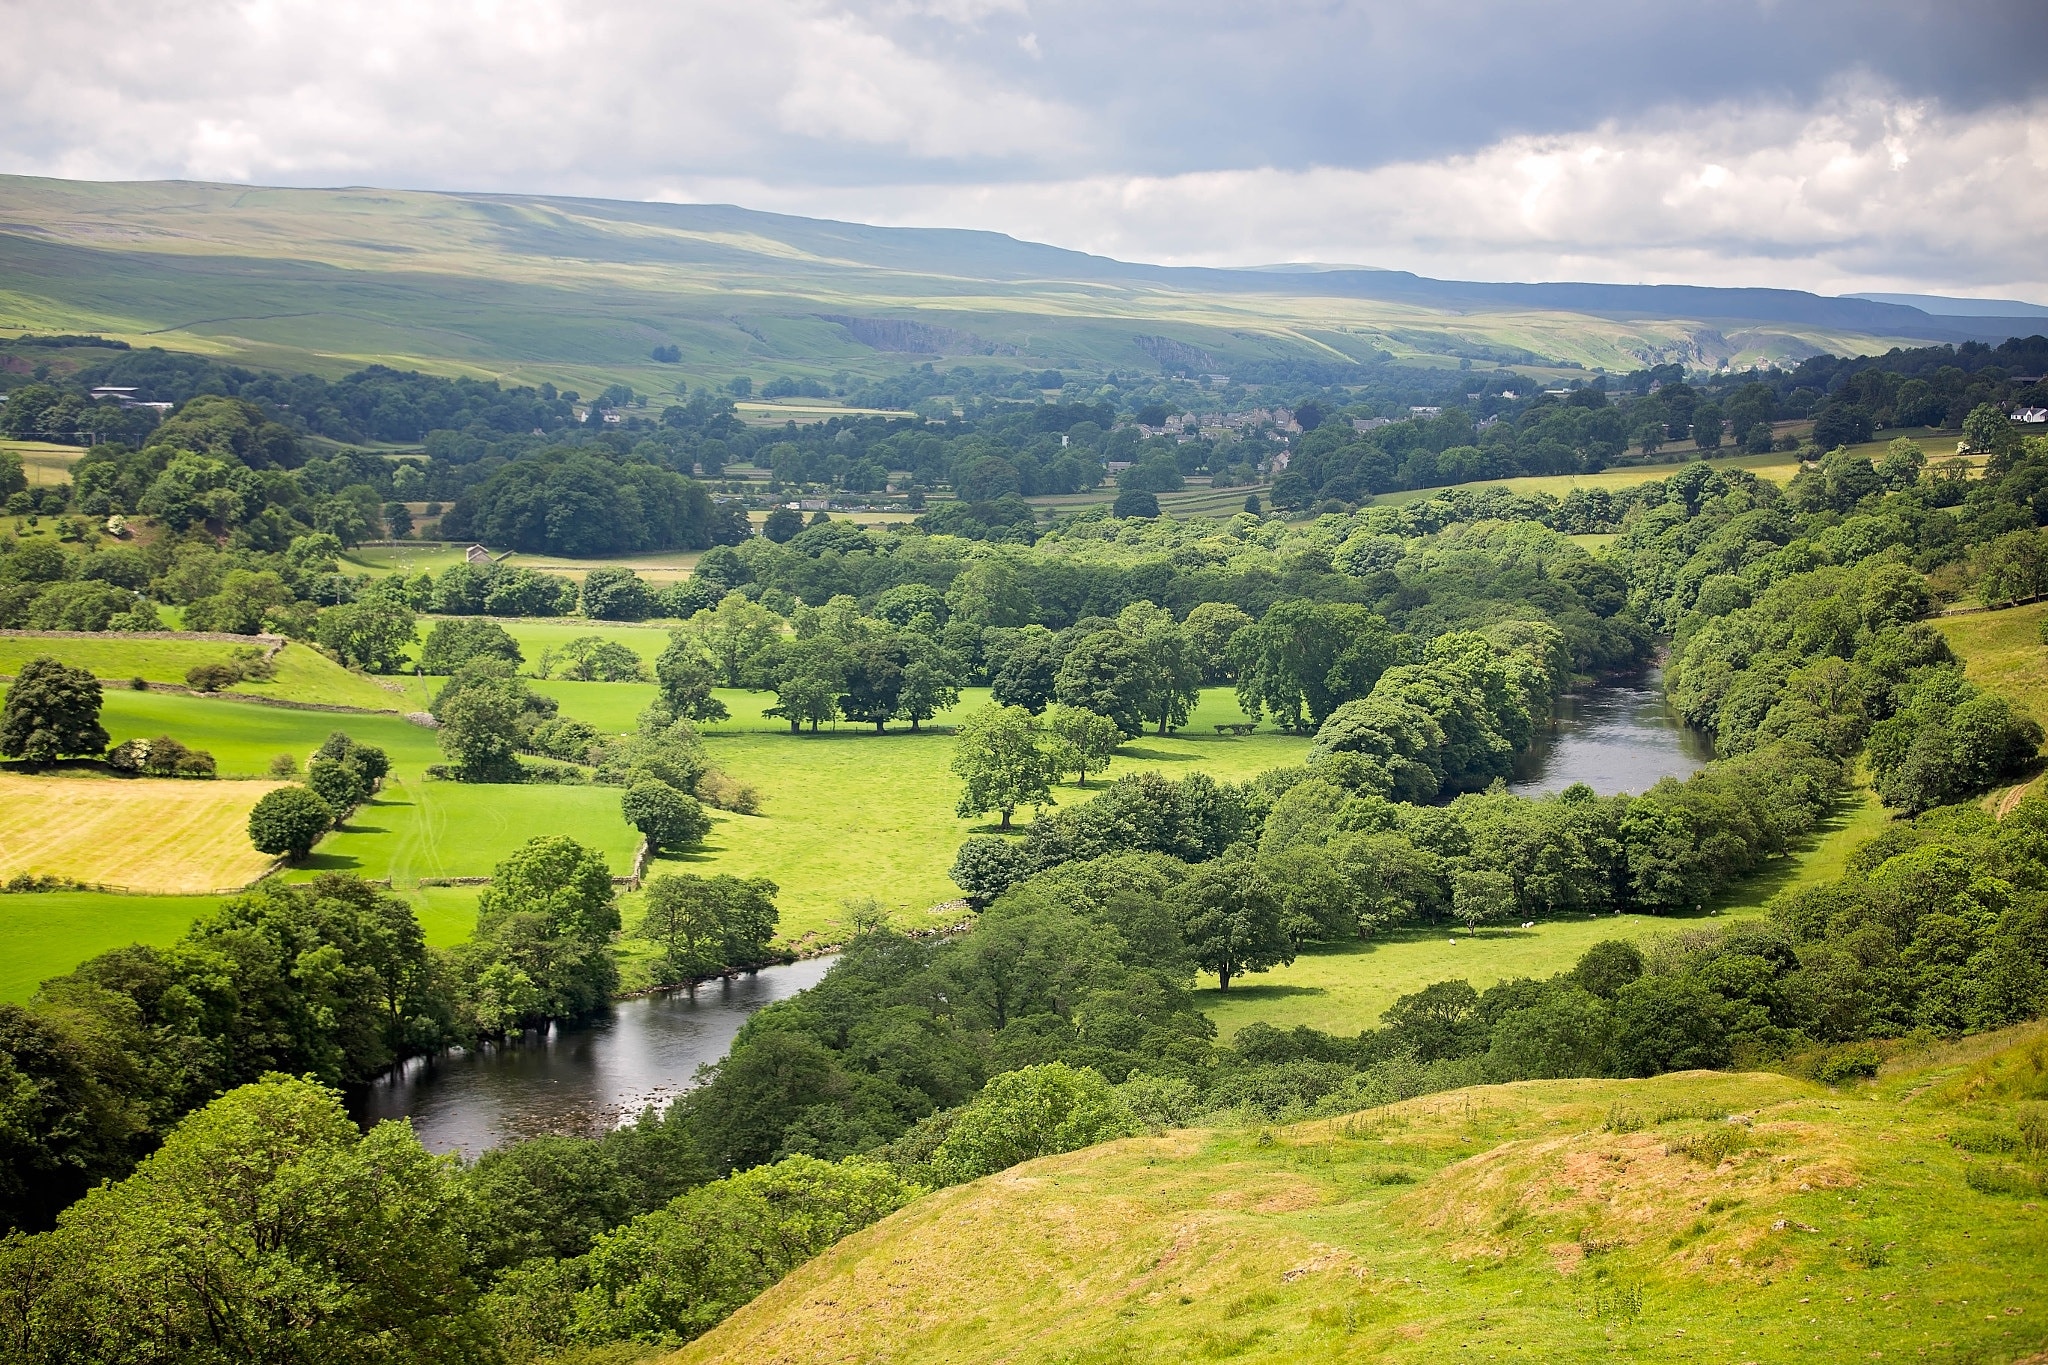 500px provided description: Teesdale, England [#field ,#sky ,#landscape ,#nature ,#travel ,#tree ,#summer ,#grass ,#wood ,#countryside ,#mountain ,#valley ,#cloud ,#hill ,#panoramic ,#rural ,#outdoors ,#horizontal ,#idyllic ,#hayfield ,#Teesdale]